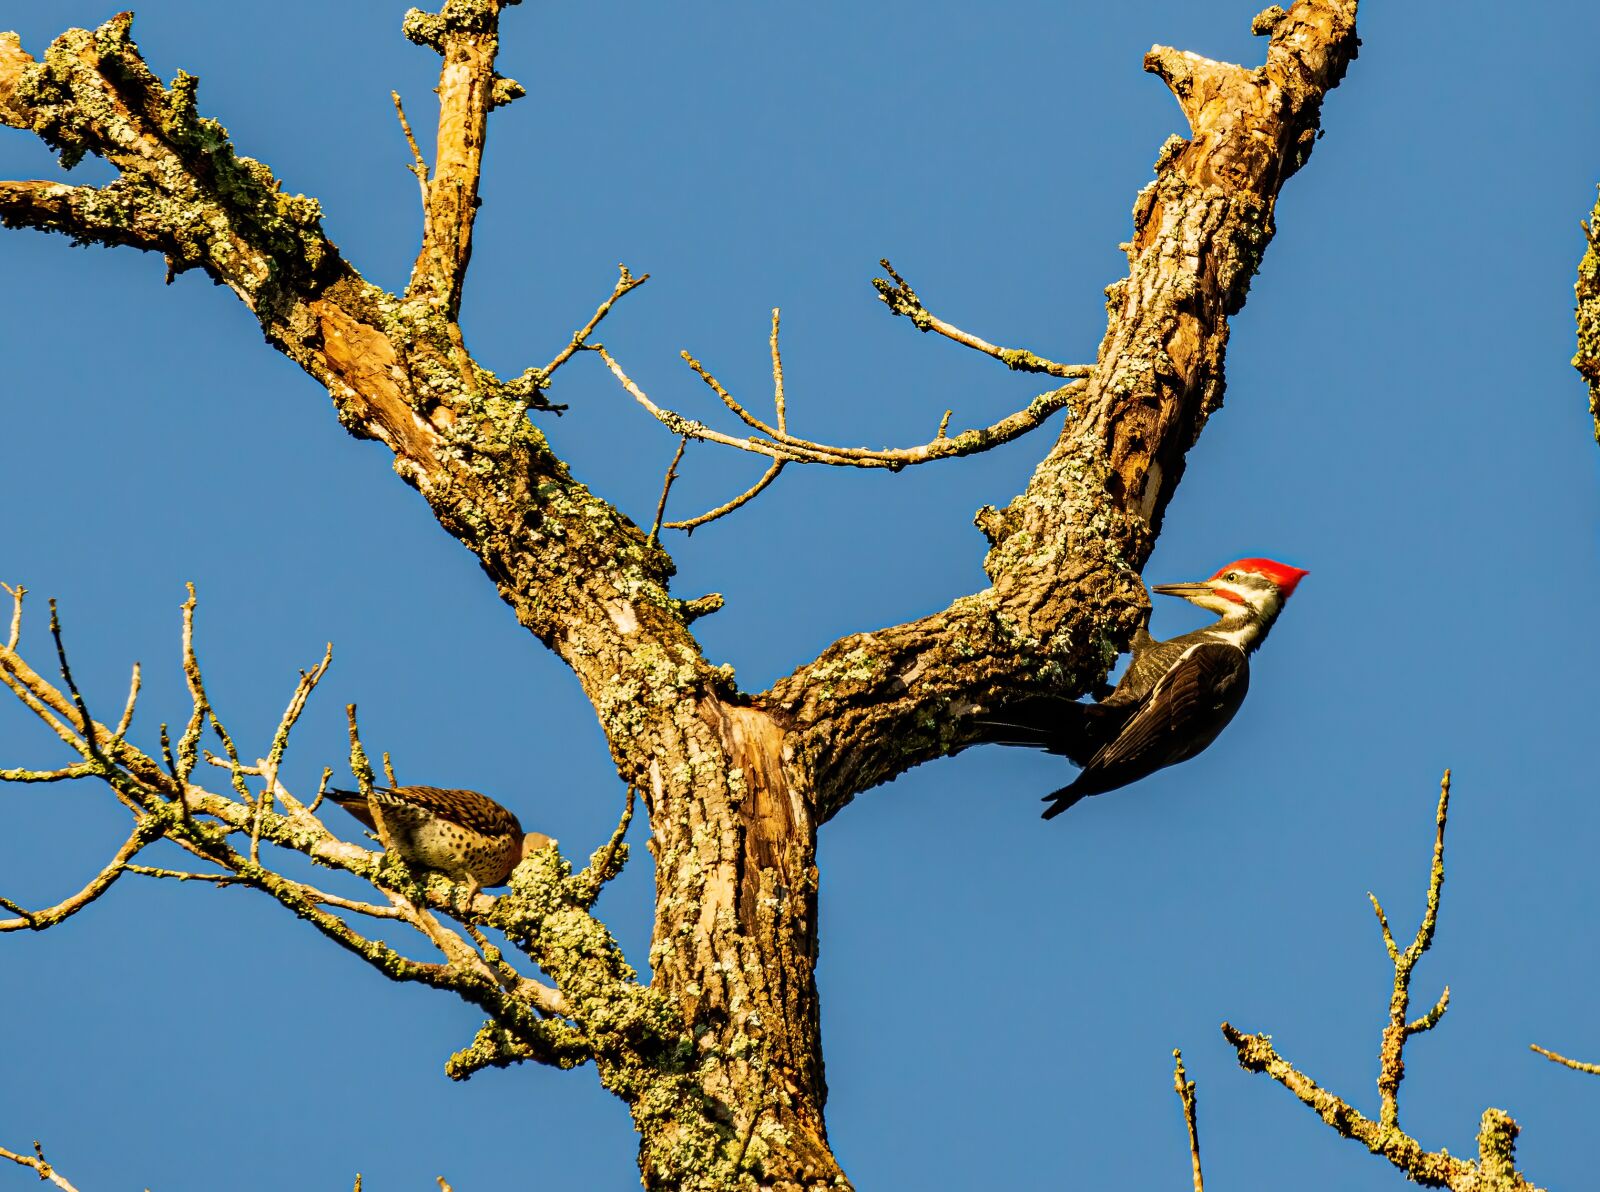 Sony a6400 sample photo. Pileated woodpecker, pileated woodpecker photography